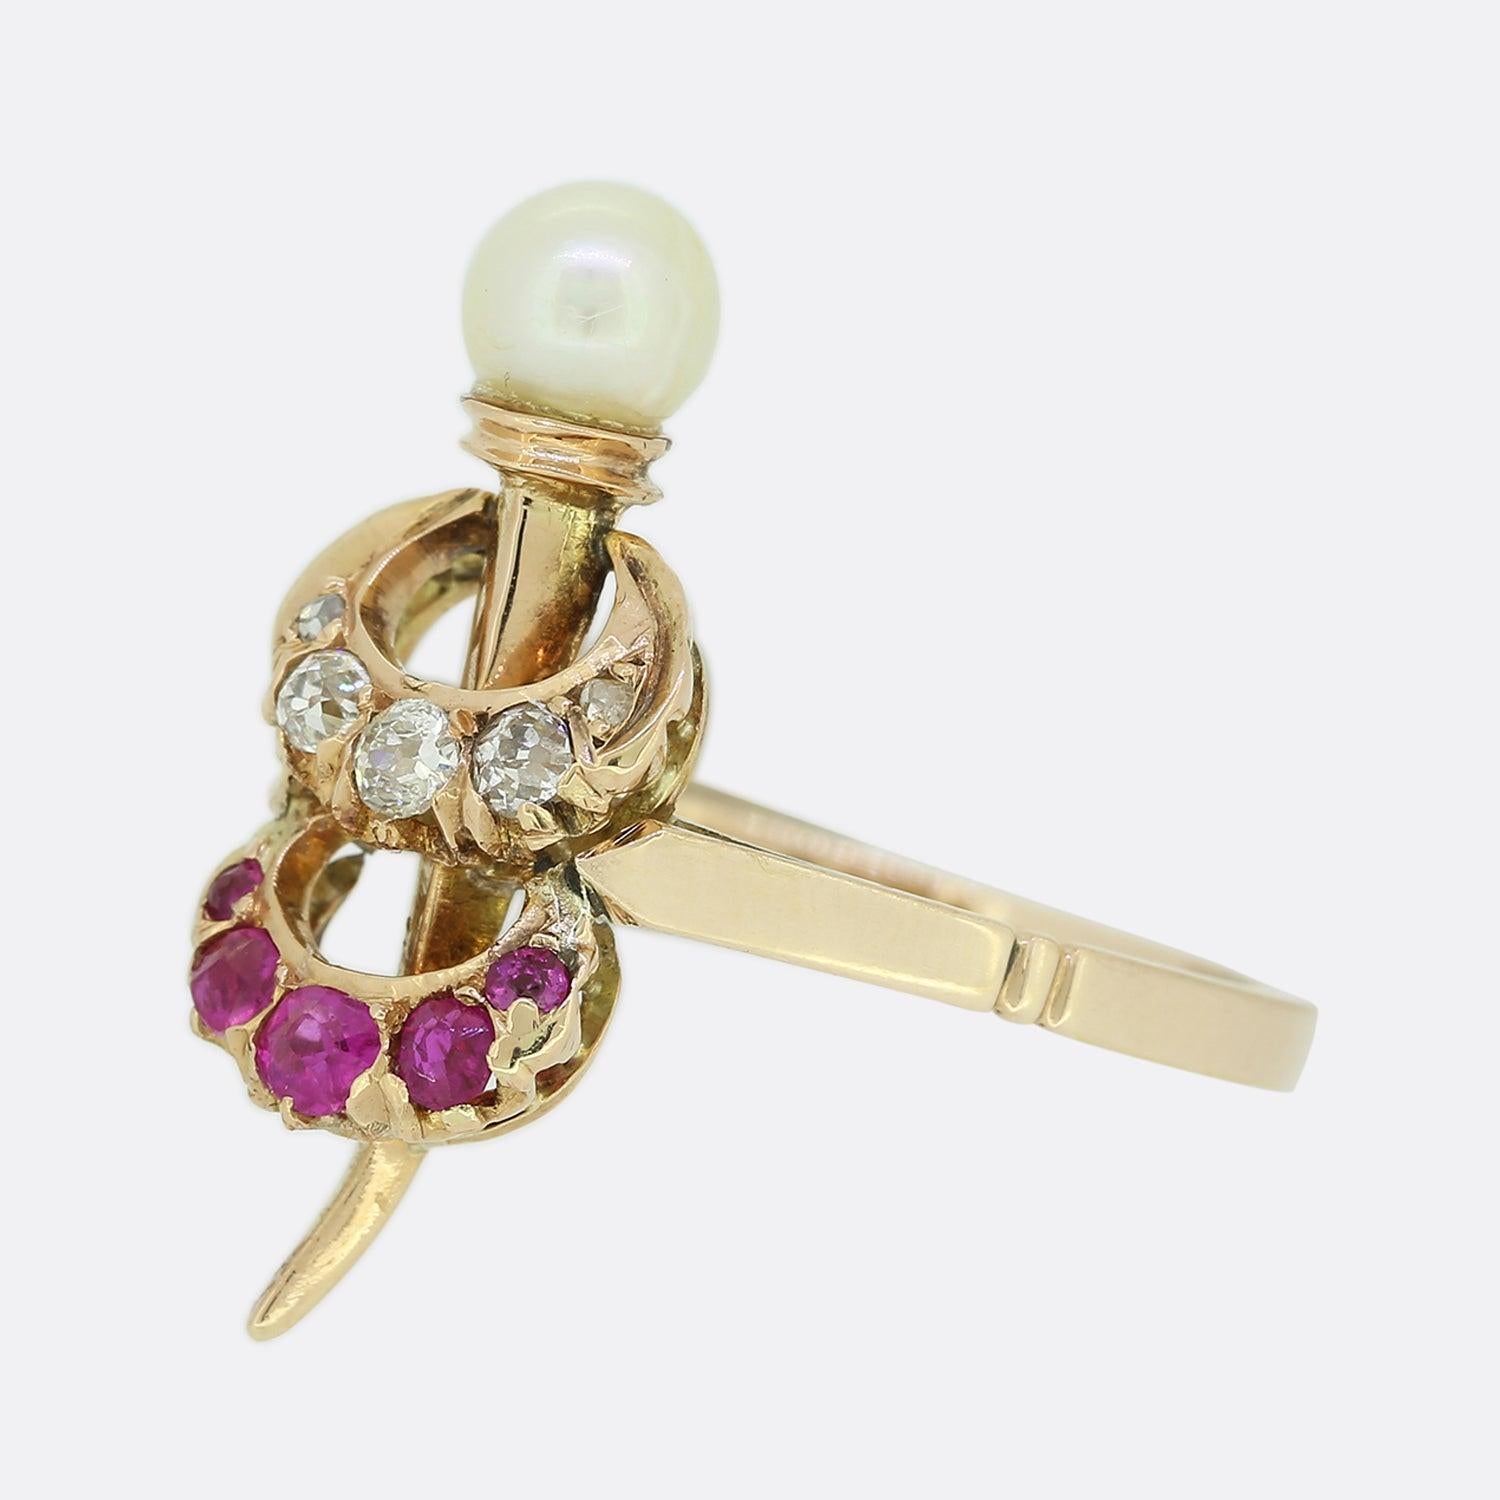 This is an 18ct rose gold diamond, pearl and ruby ring. The ring consists of two crescent moons, one of which is set with diamonds and the other with rubies. There is also a spear going through both of the crescents and the ring has been crafted in